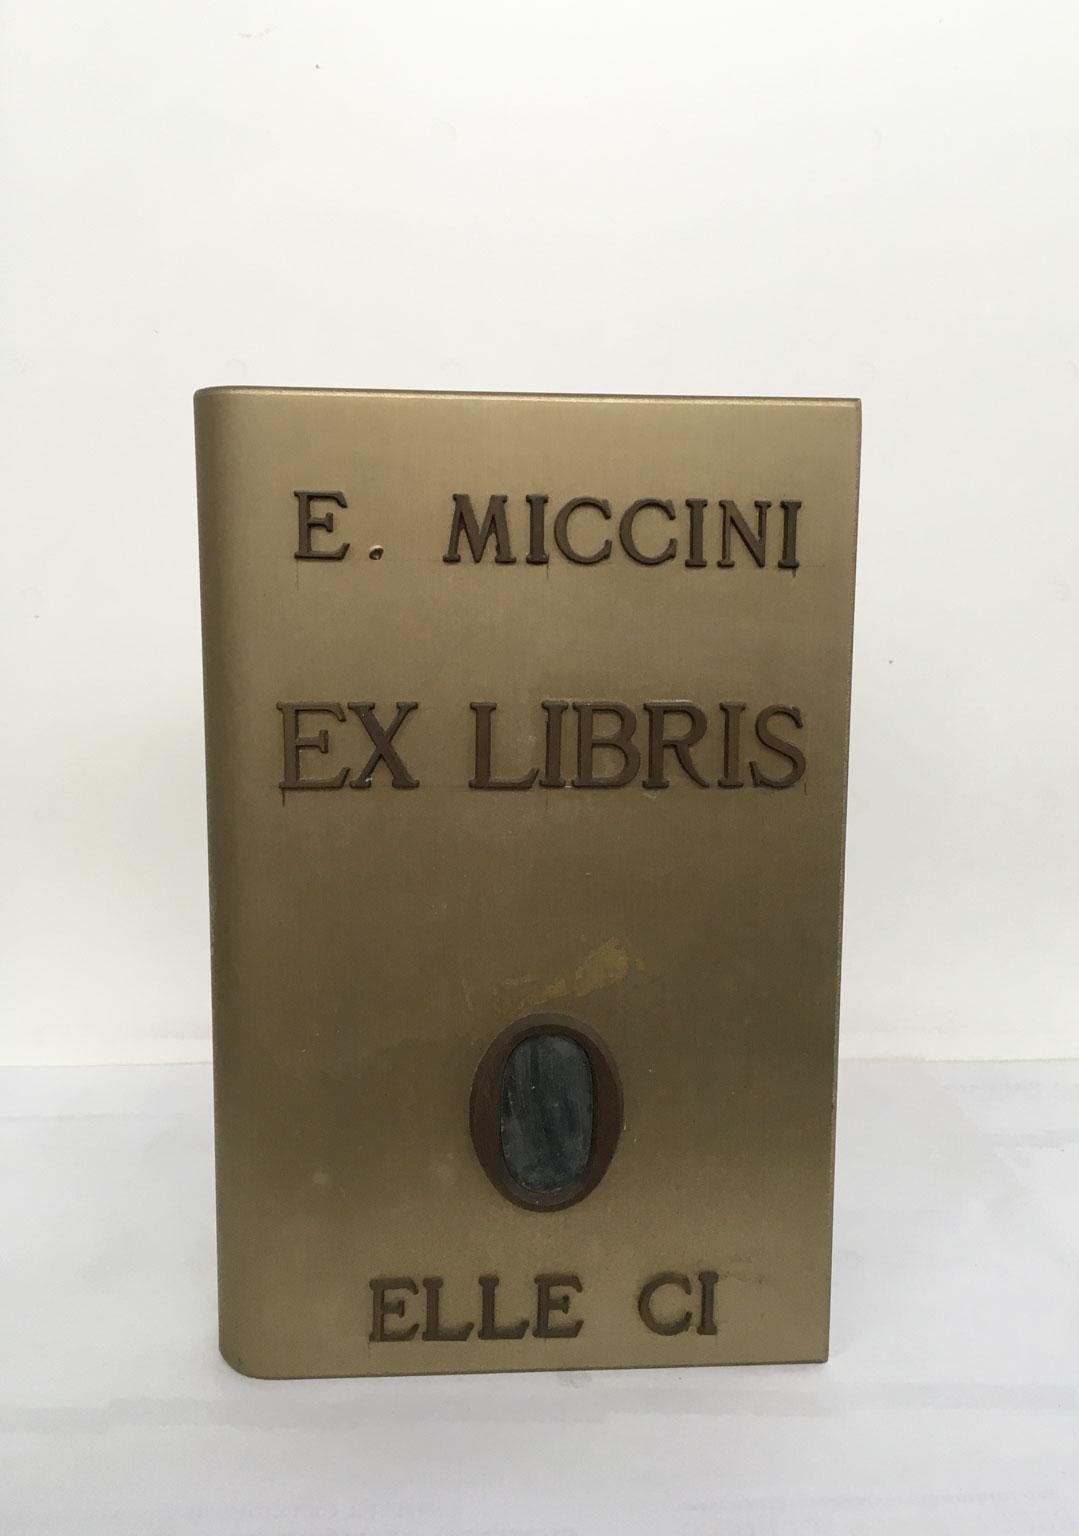 This intense artwork was created in 1970 by the Italian artist Eugenio Miccini. It is a multiple of 30 specimens, numbered and signed 3/30. The title is "Ex Libris" translated in "From book".
Eugenio Miccini completed his study in Human field and